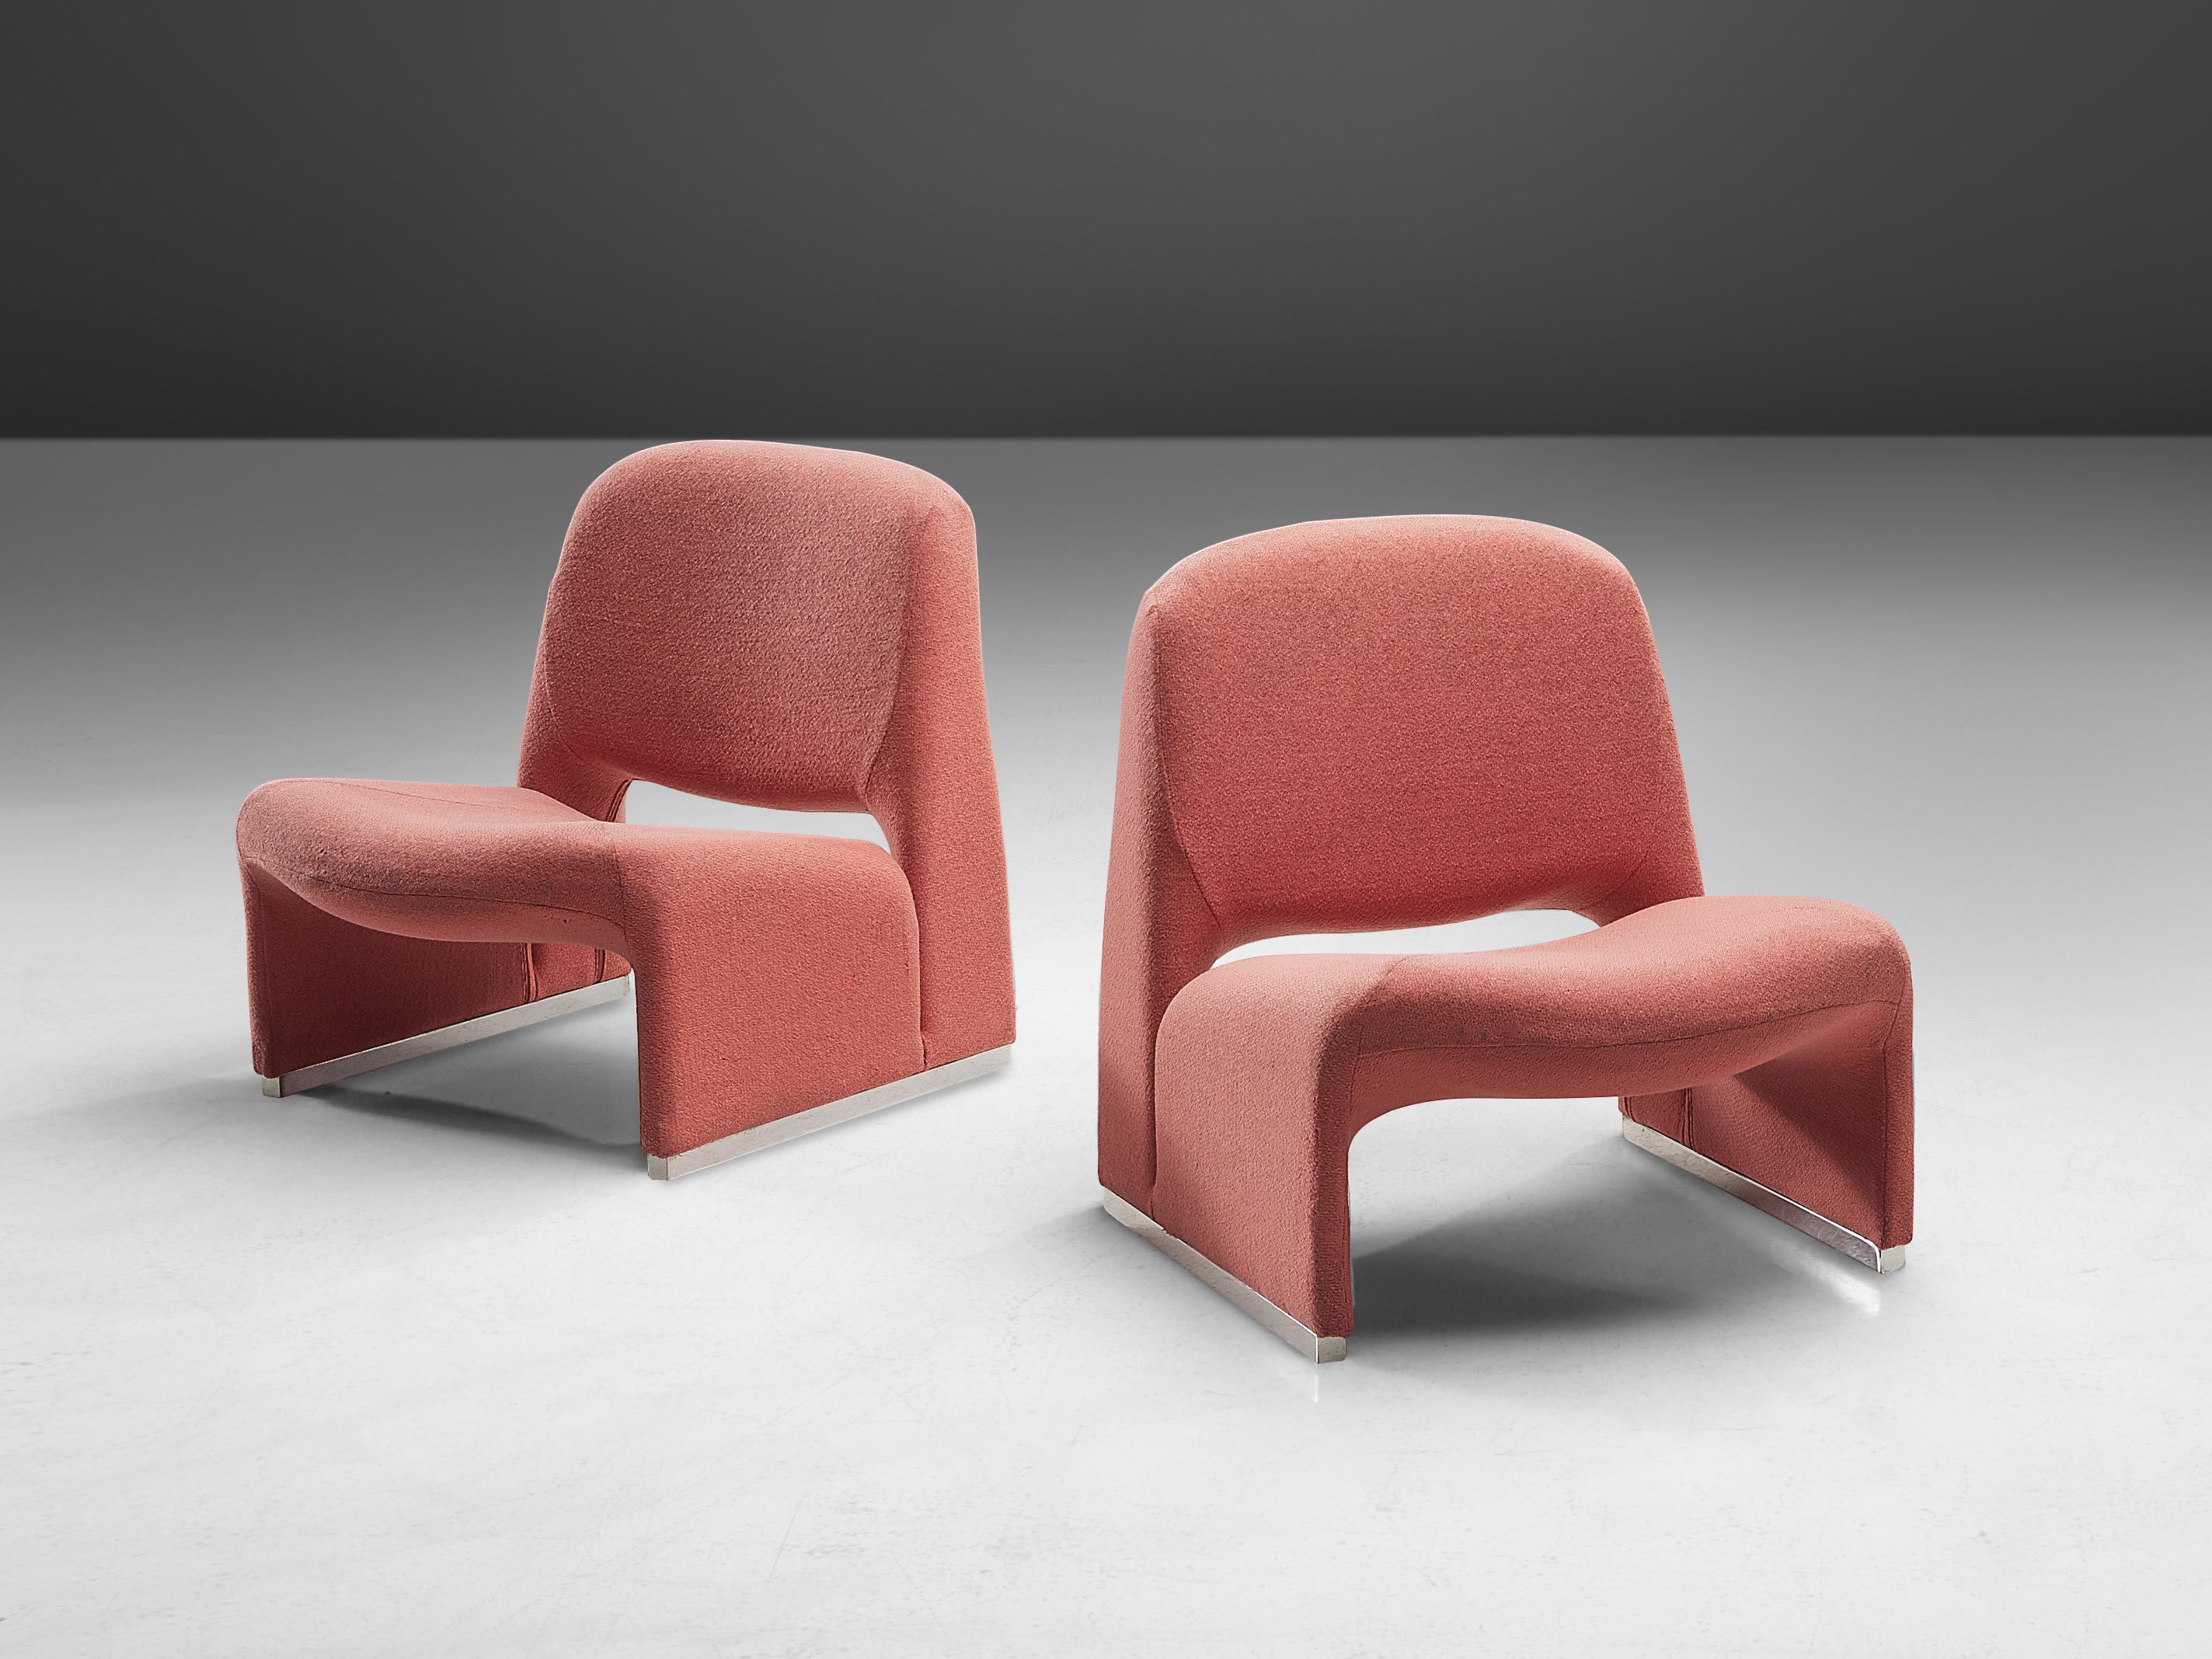 Lounge chairs, fabric, metal, Italy, 1970s

These lounge chairs strongly remind of Giancarlo Piretti’s ‘Alky’ lounge chair (1969), yet they feature characteristic differences. Whereas the ‘Alky’ lounge chair consists of one shell, these chairs have